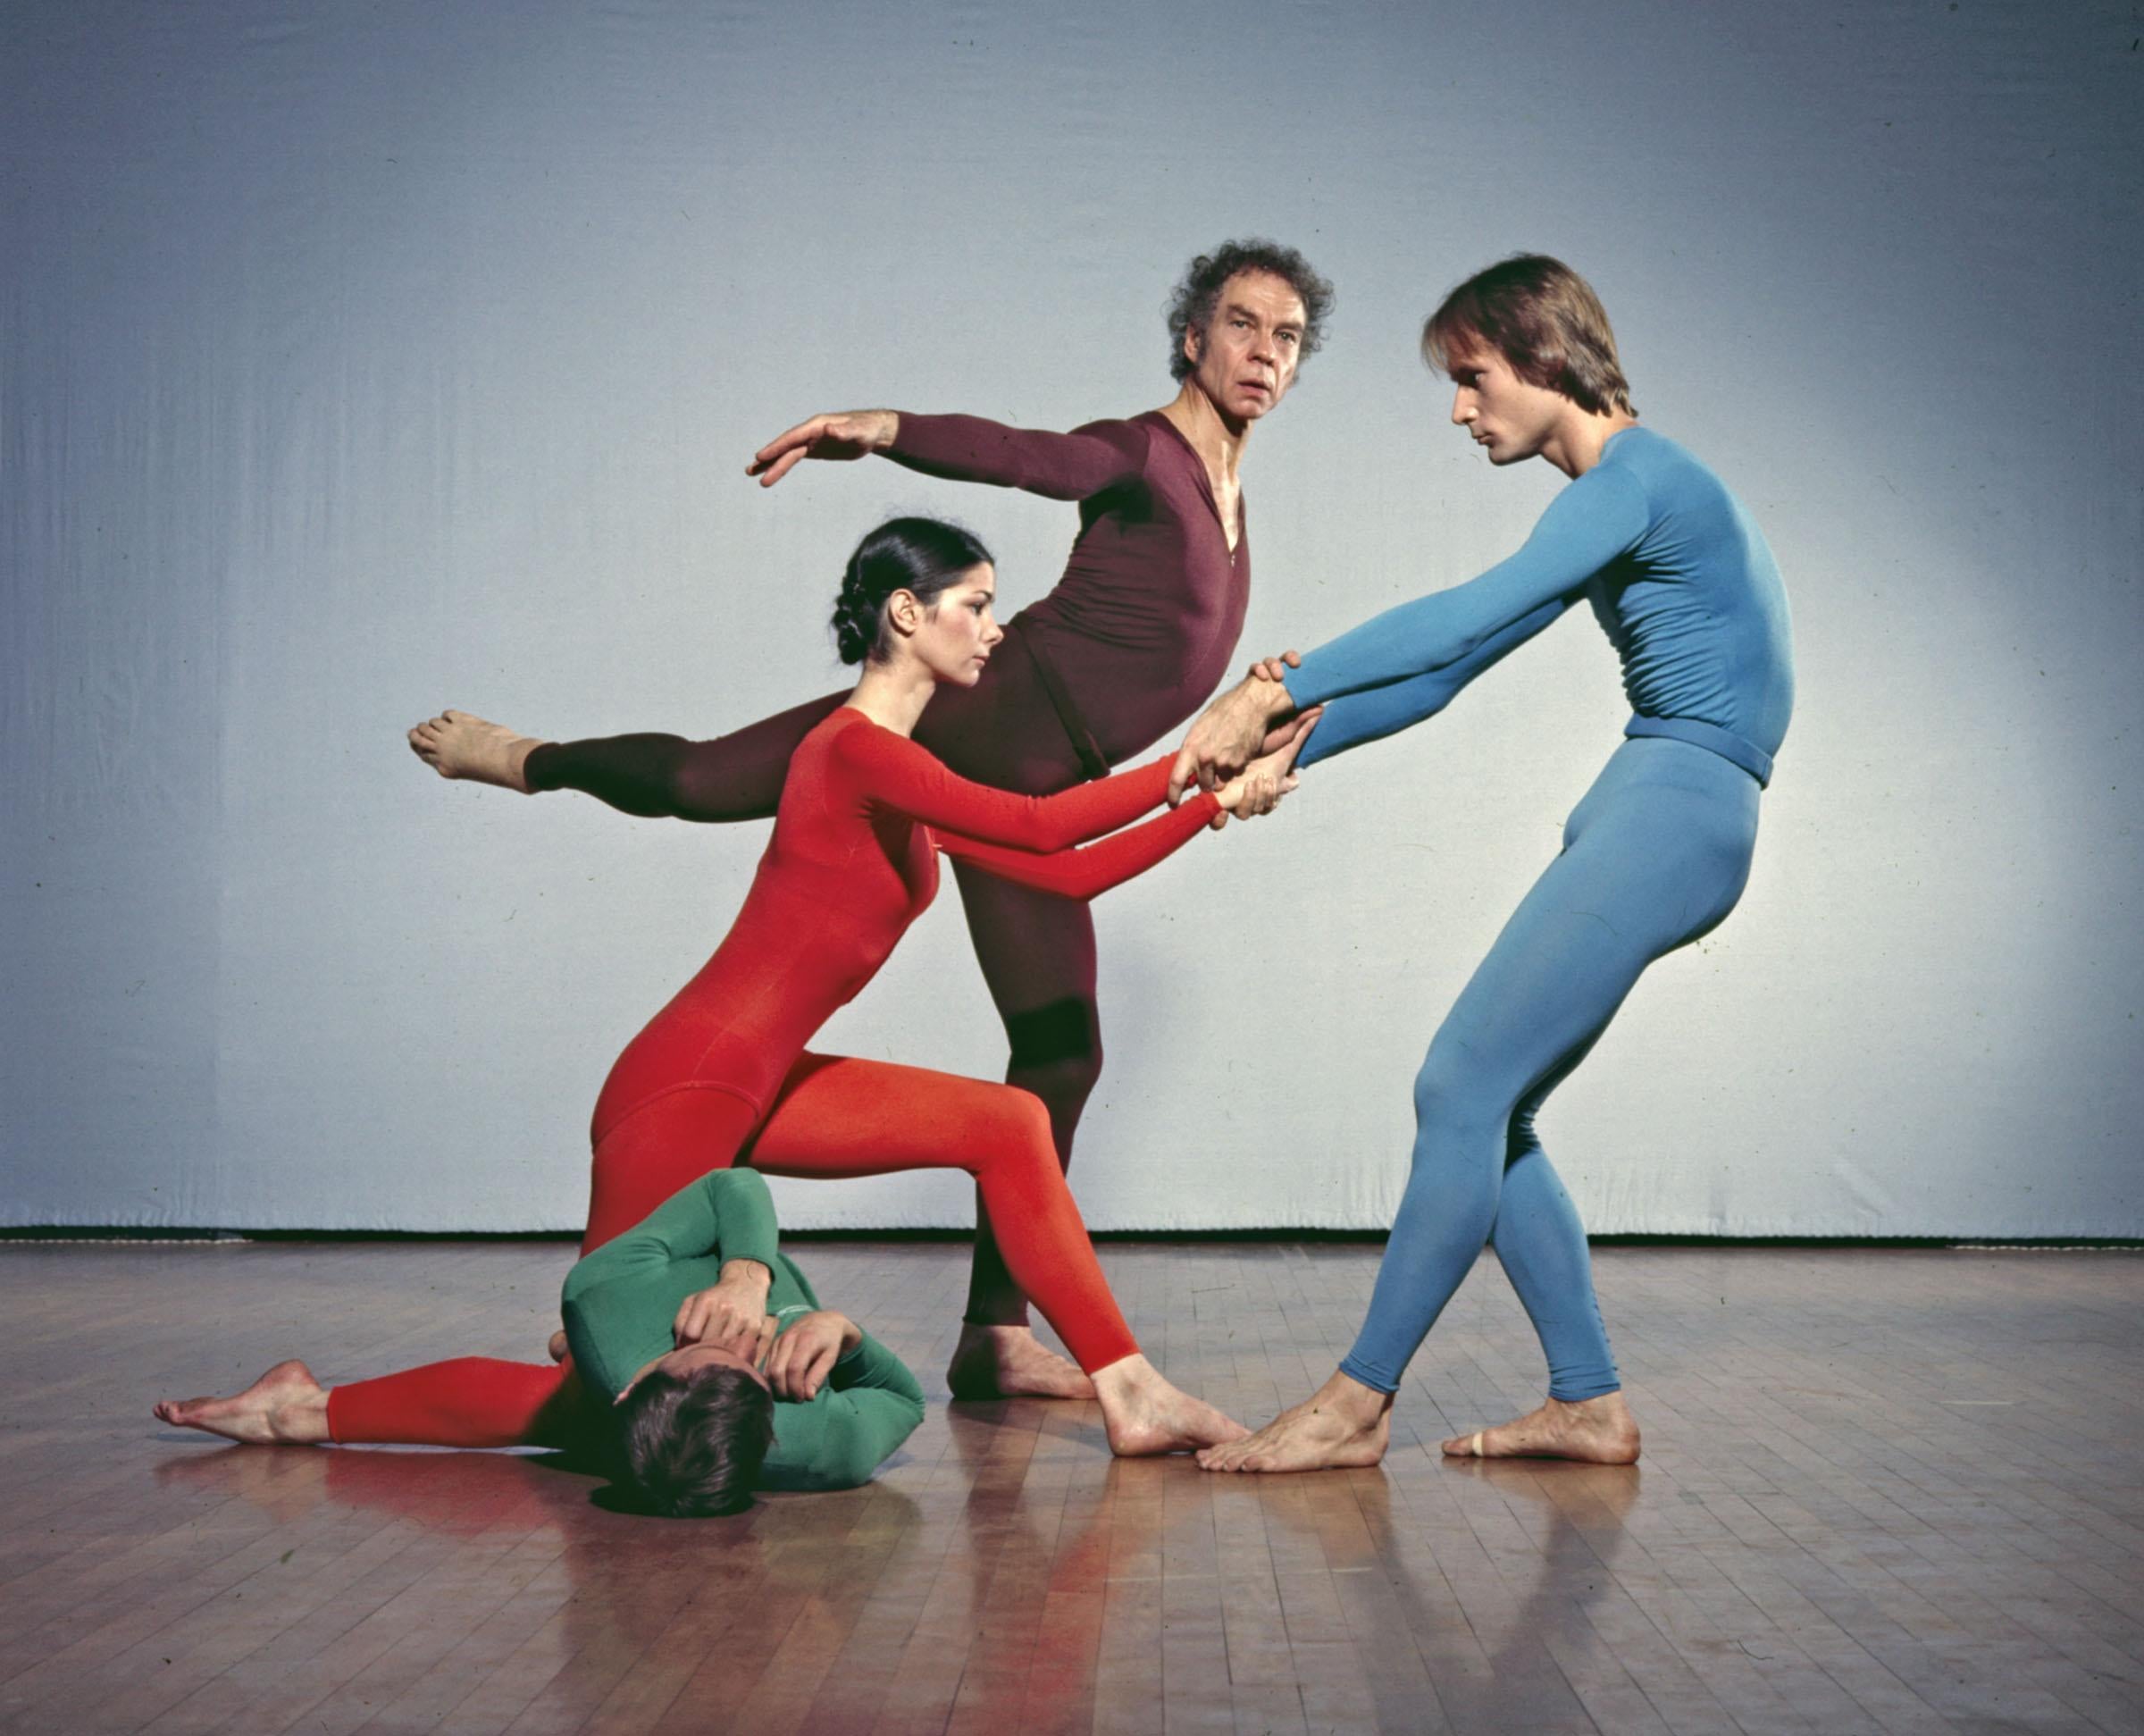 Jack Mitchell Color Photograph - Merce Cunningham Dance Company Repertory, Color 17 x 22"  Exhibition Photo